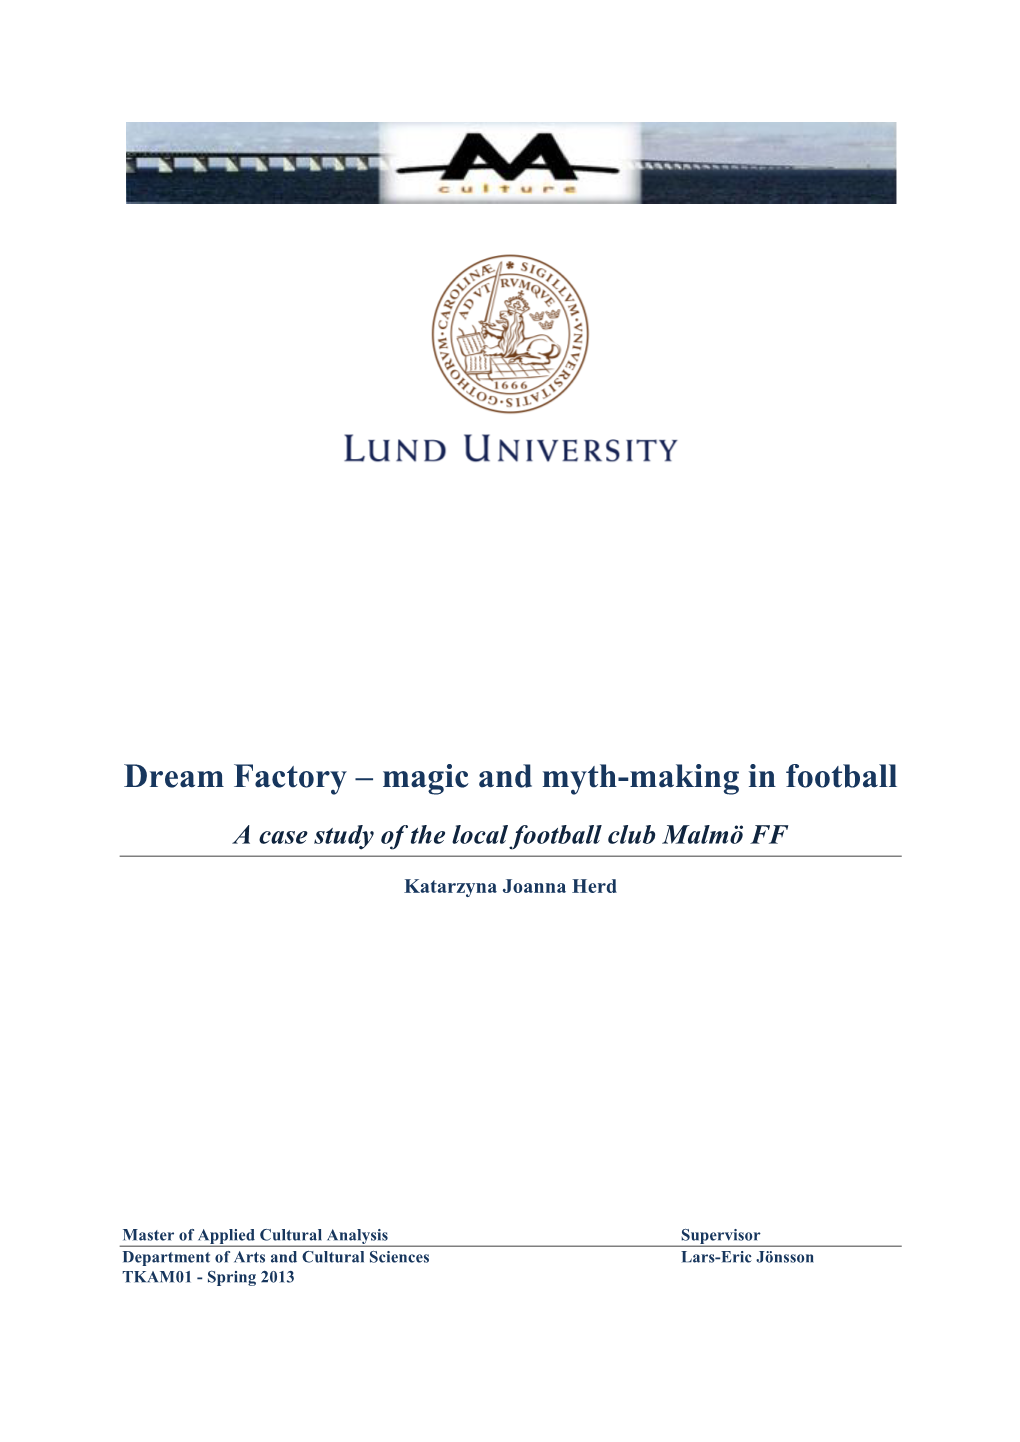 Dream Factory – Magic and Myth-Making in Football